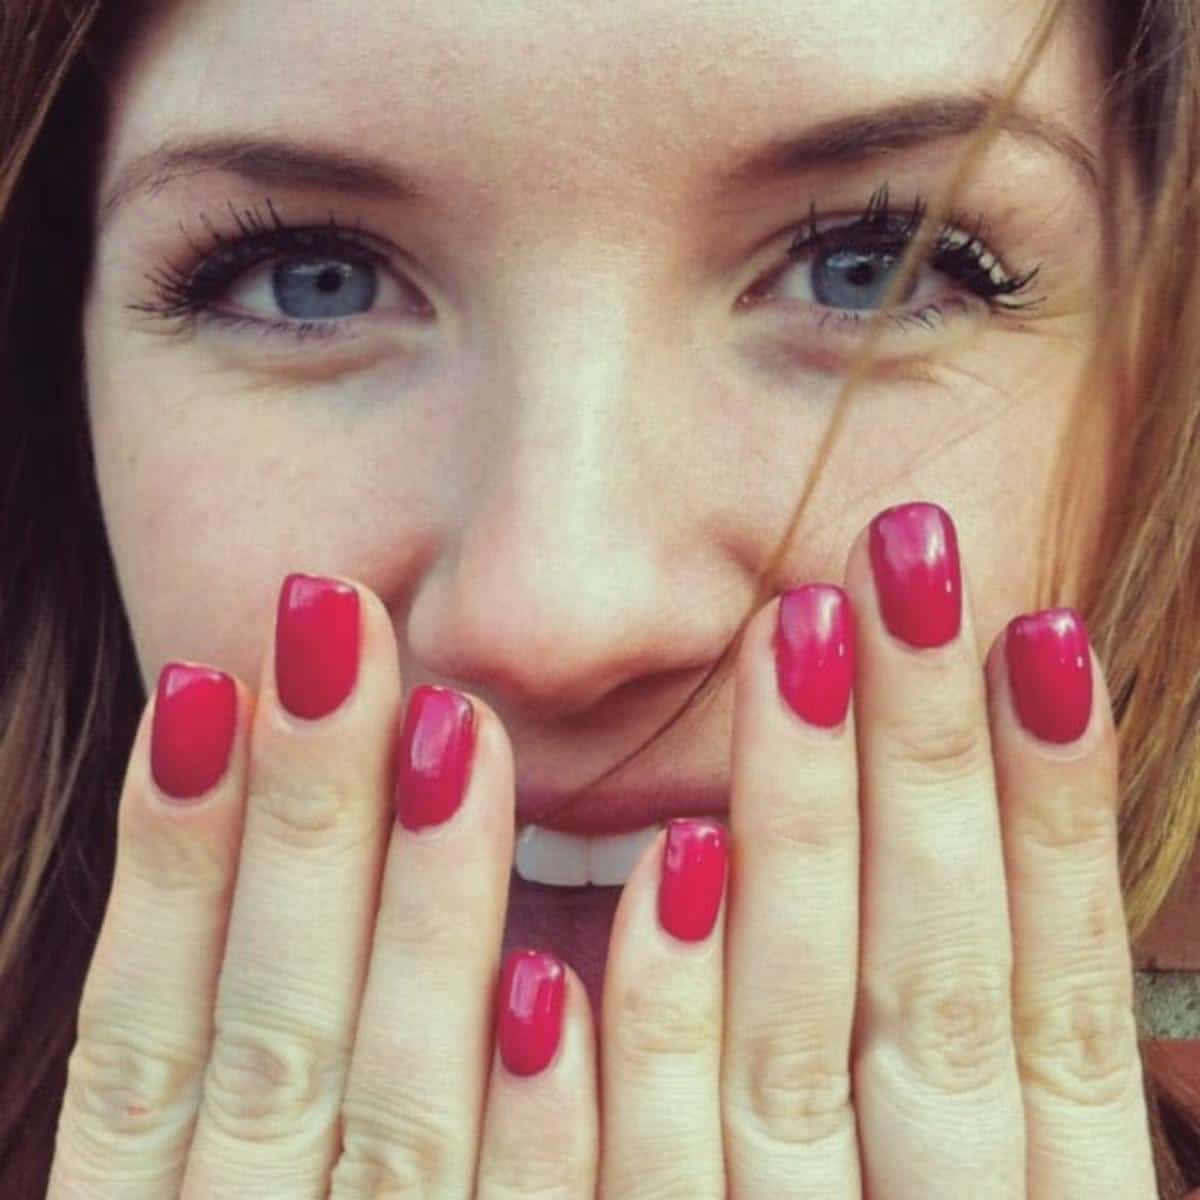 Smiling woman with Shellac Manicure.